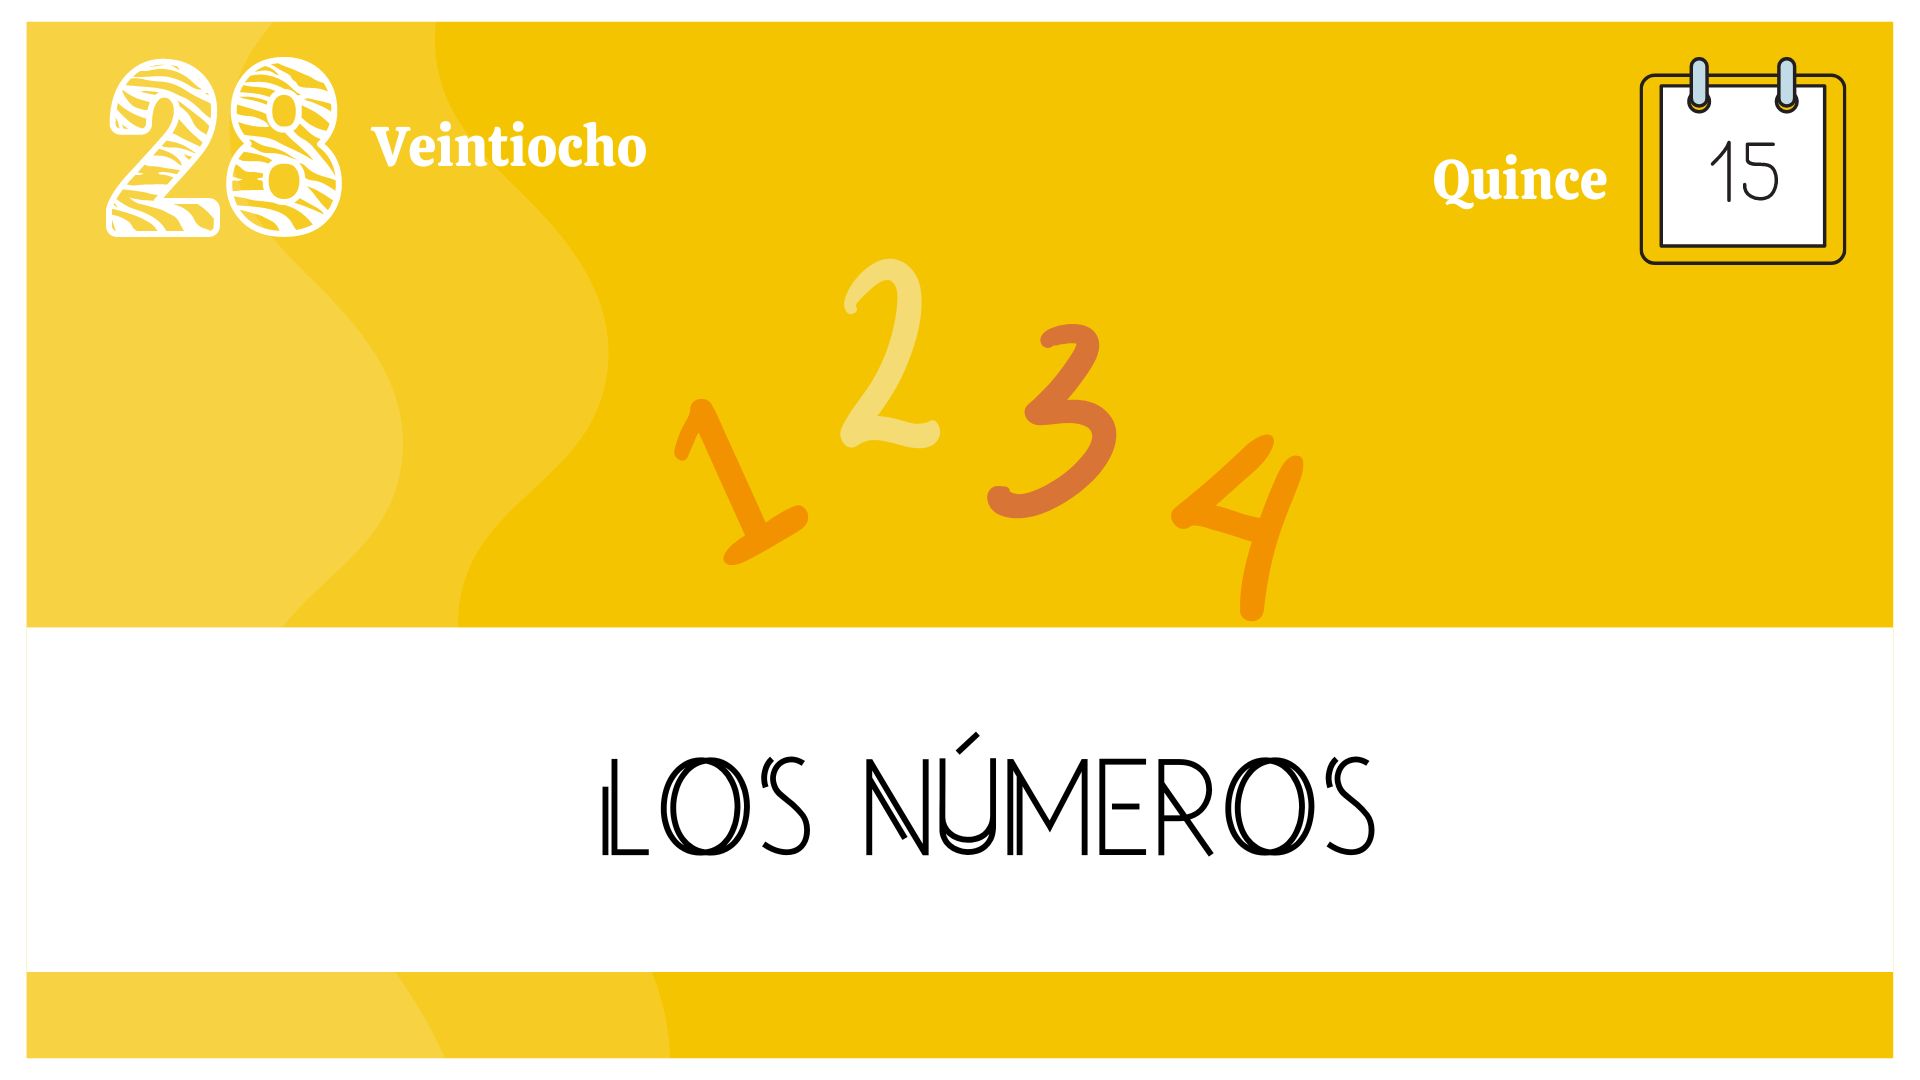 numbers in Spanish